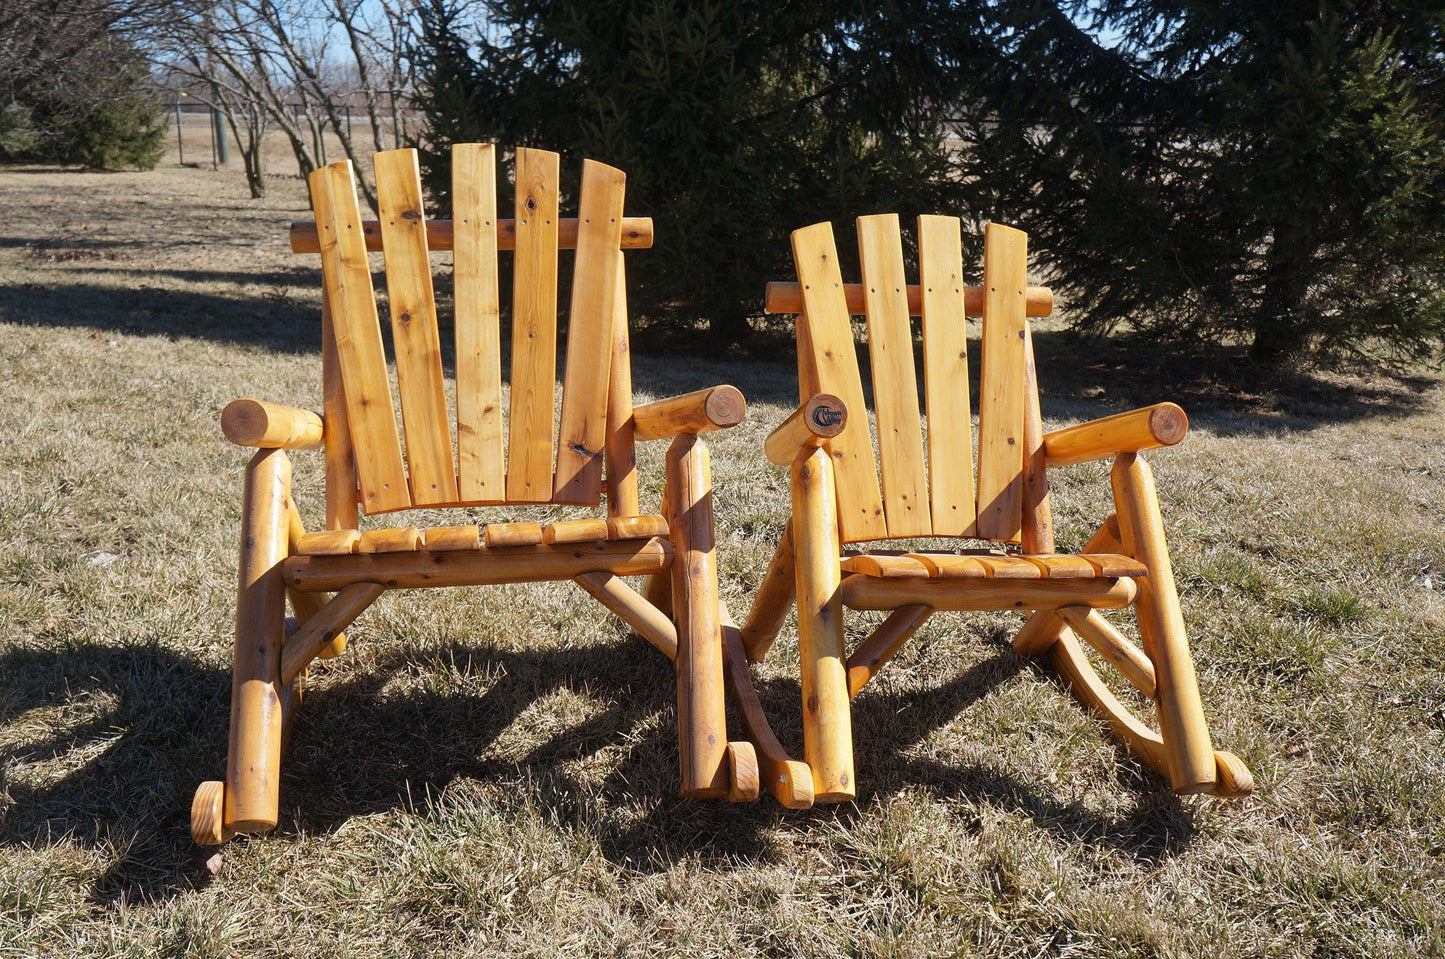 The Moon Valley Rustic  Big and Tall Rocking Chair - 650 lbs MAX Weight Capacity - LEAD TIME TO SHIP: (UNFINISHED - 2 WEEKS) - (FINISHED - 4 WEEKS)